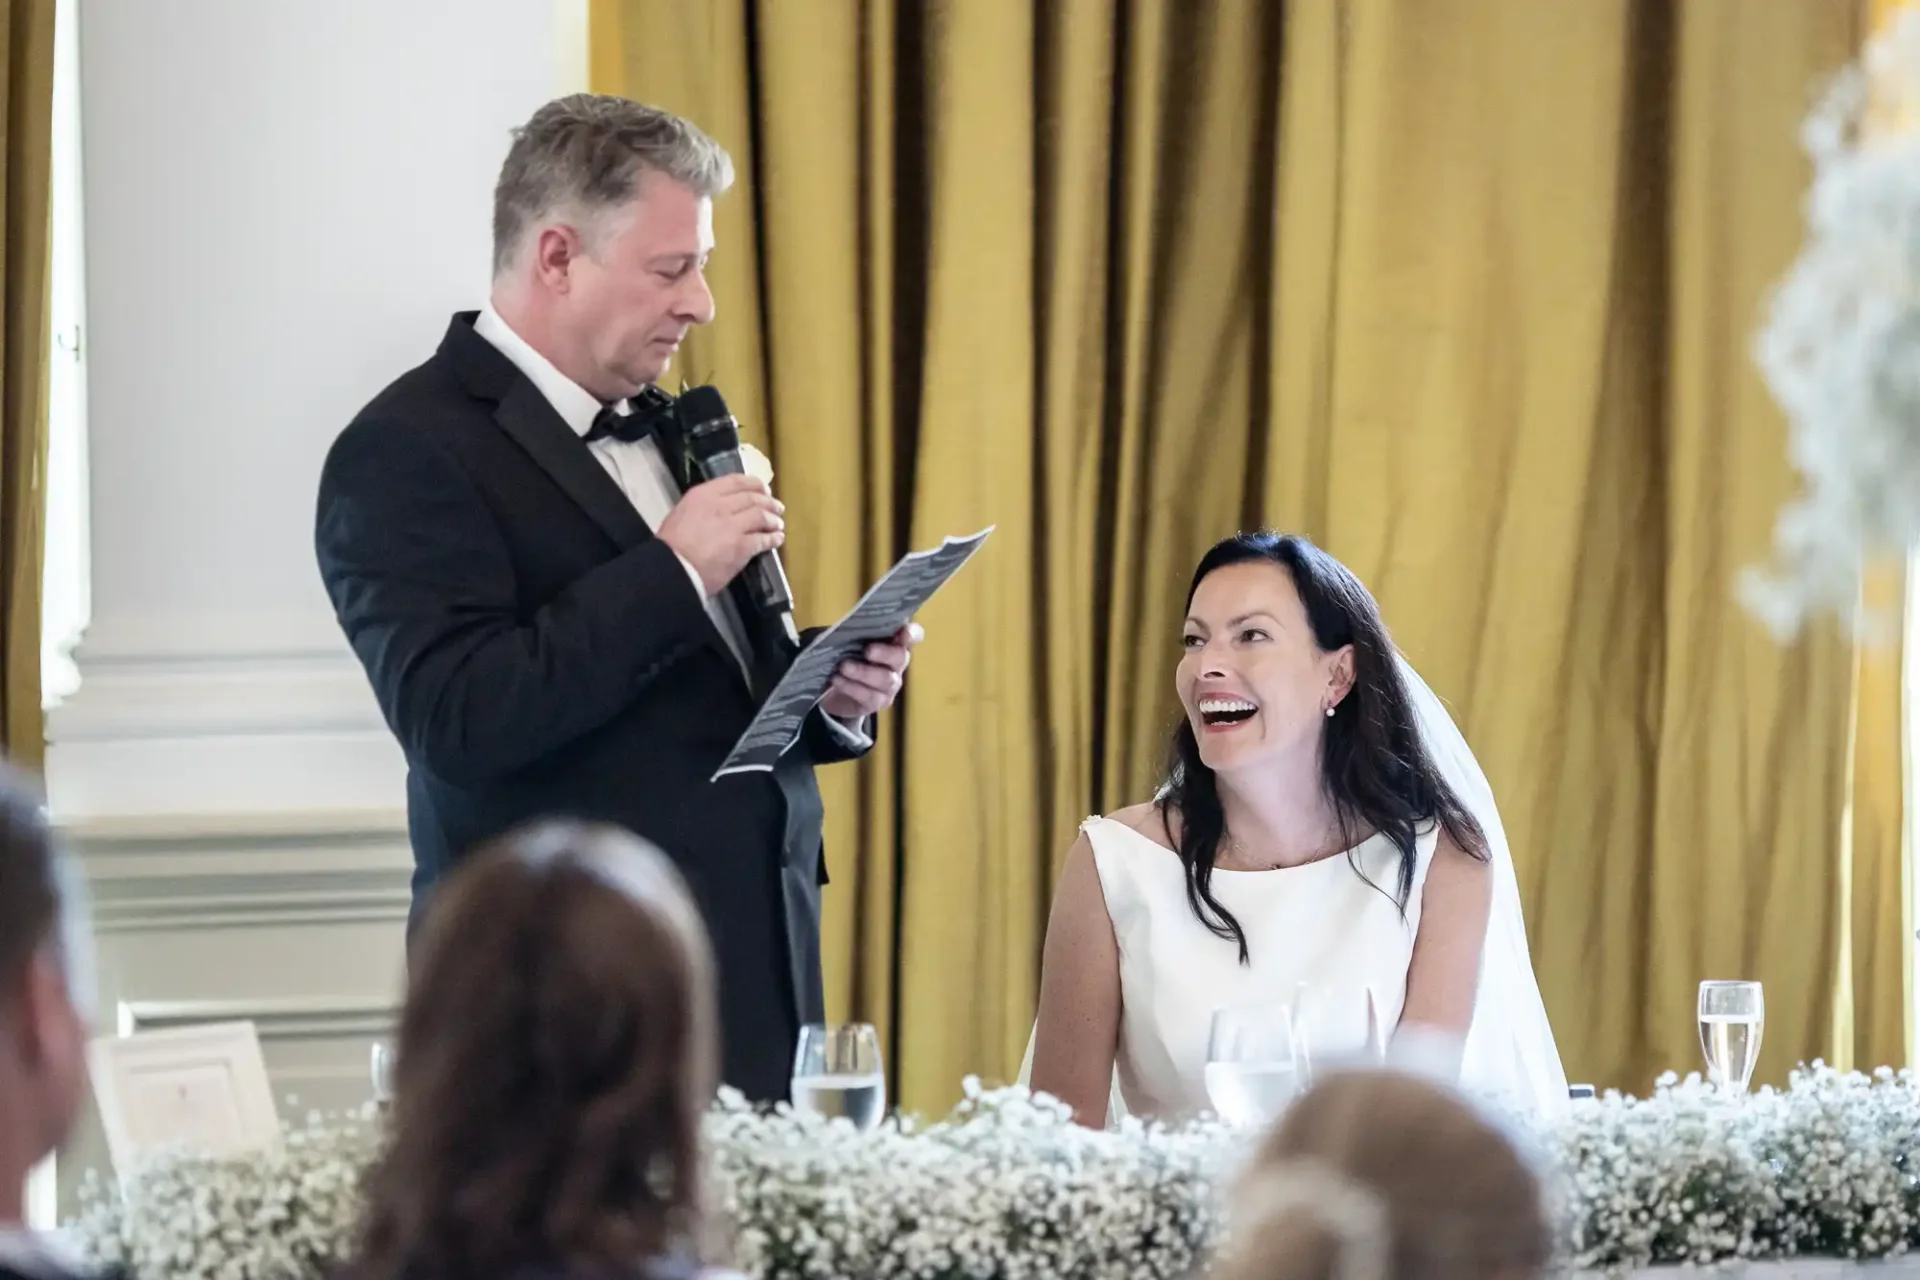 A bride laughs joyfully during a speech given by a man in a tuxedo at a wedding reception, with guests and floral decorations visible.